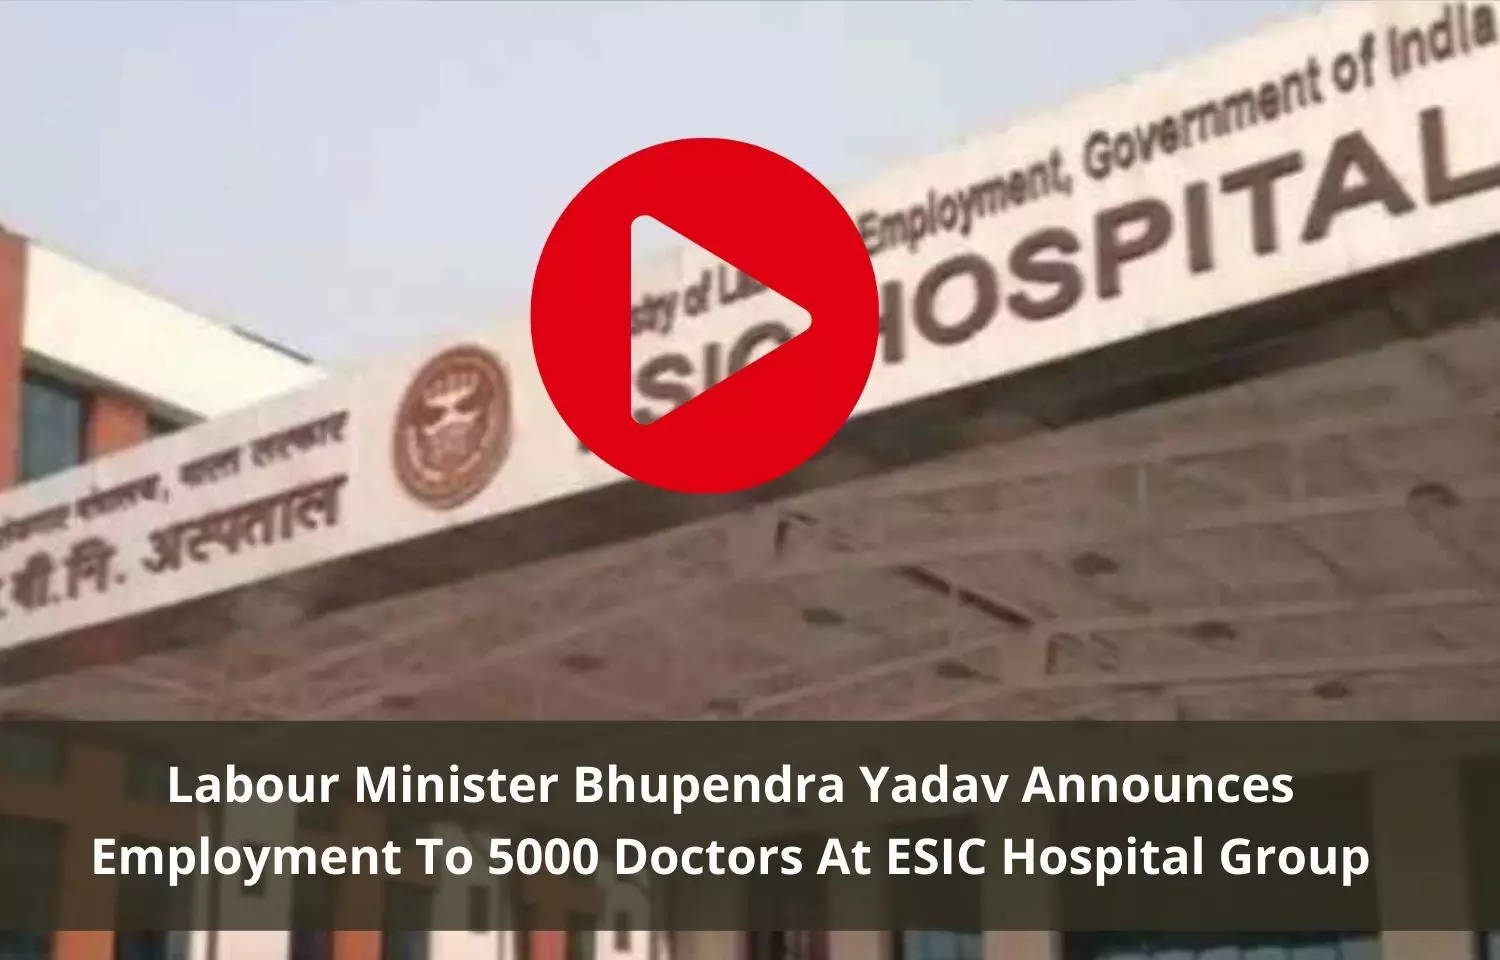 5000 doctors to be recruited at ESIC Hospital Group